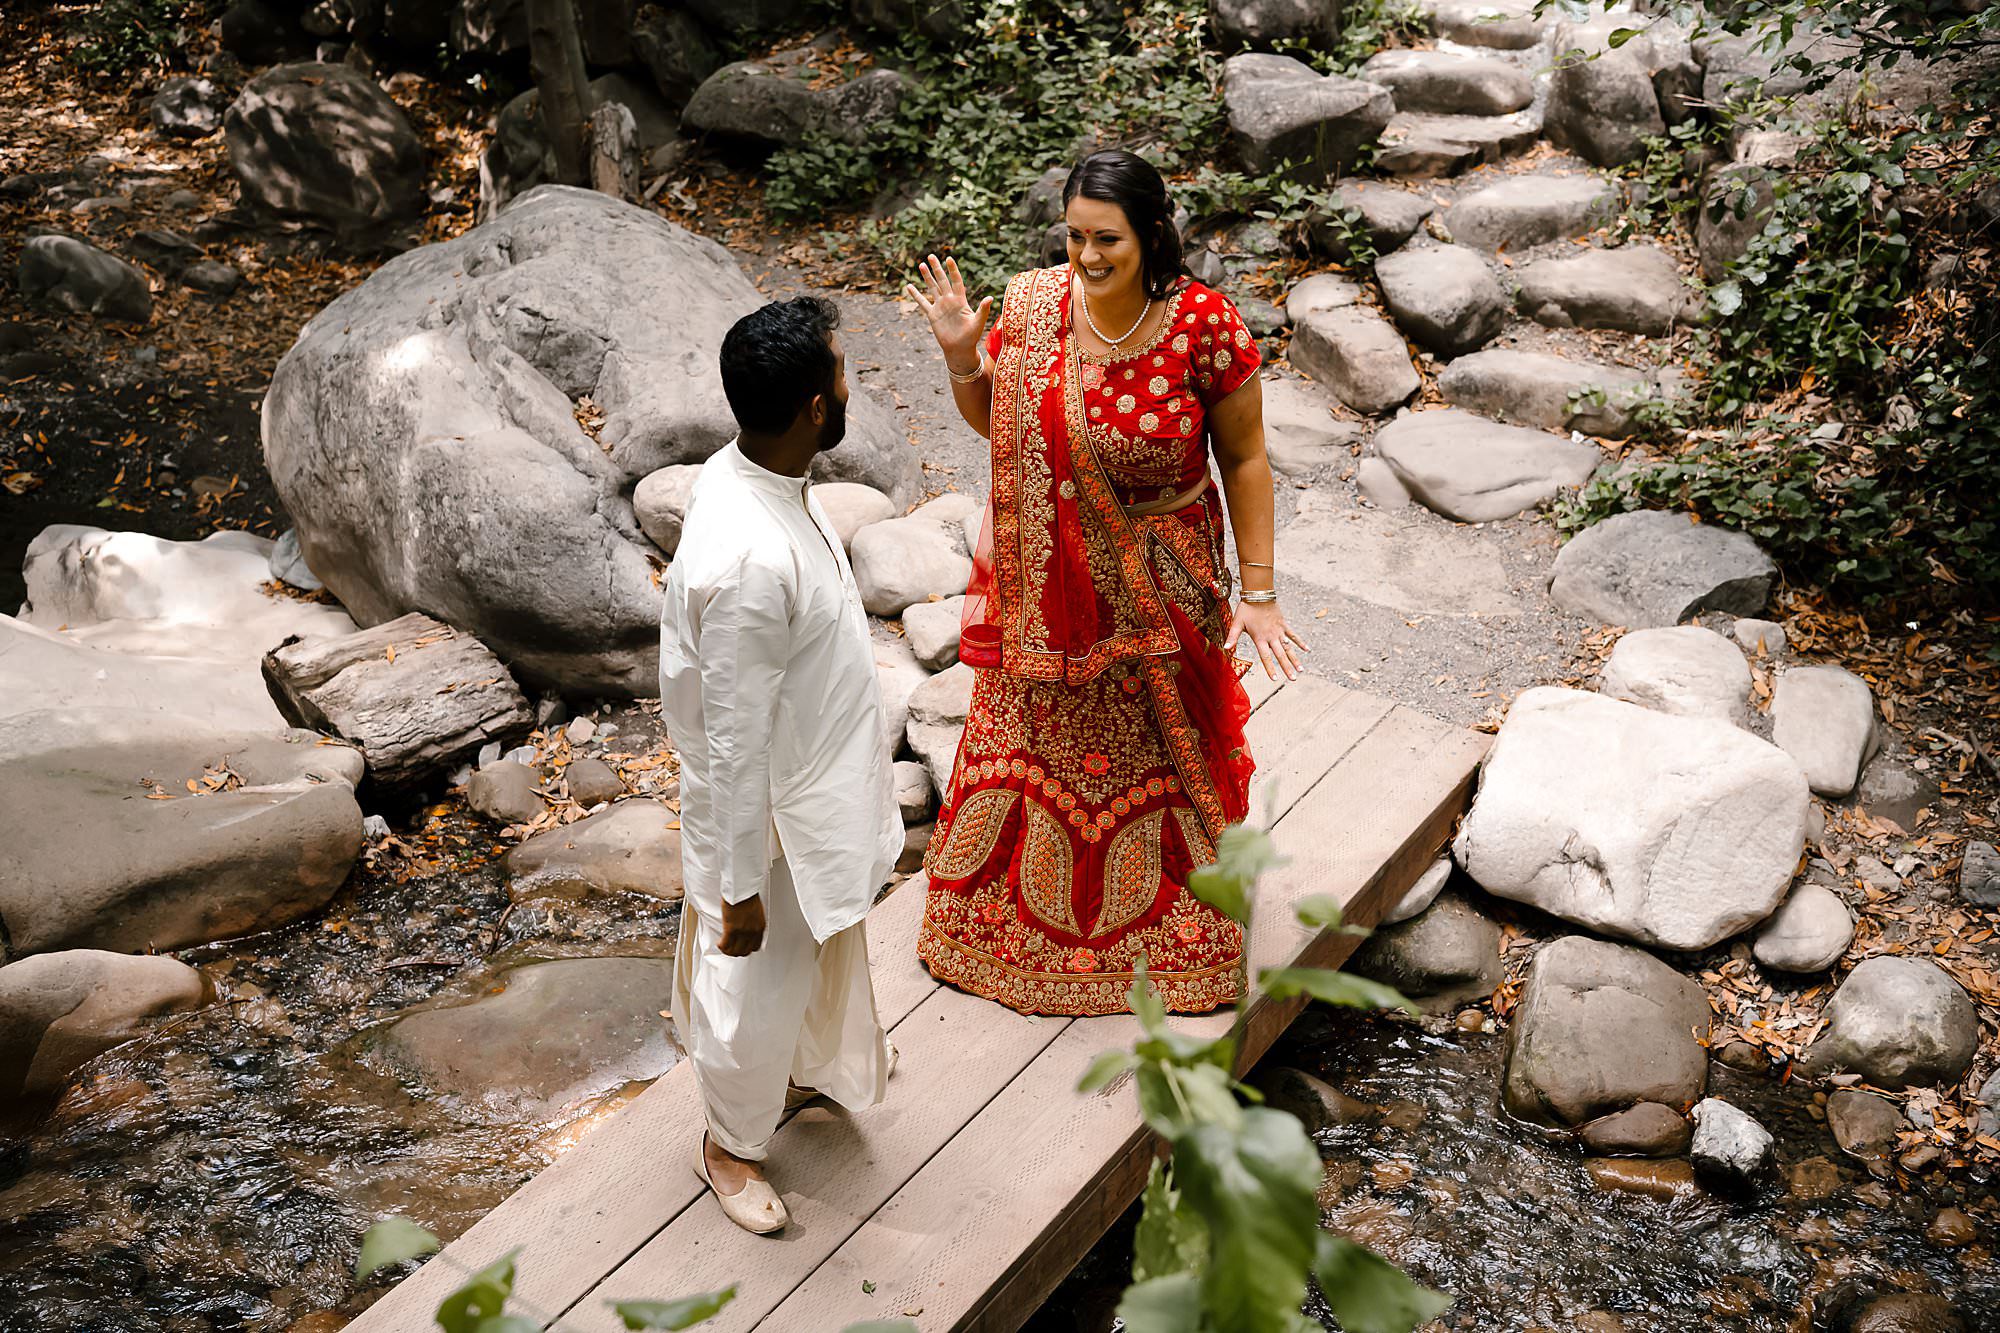 First look on the bridge at Saratoga Springs for a Hindu wedding